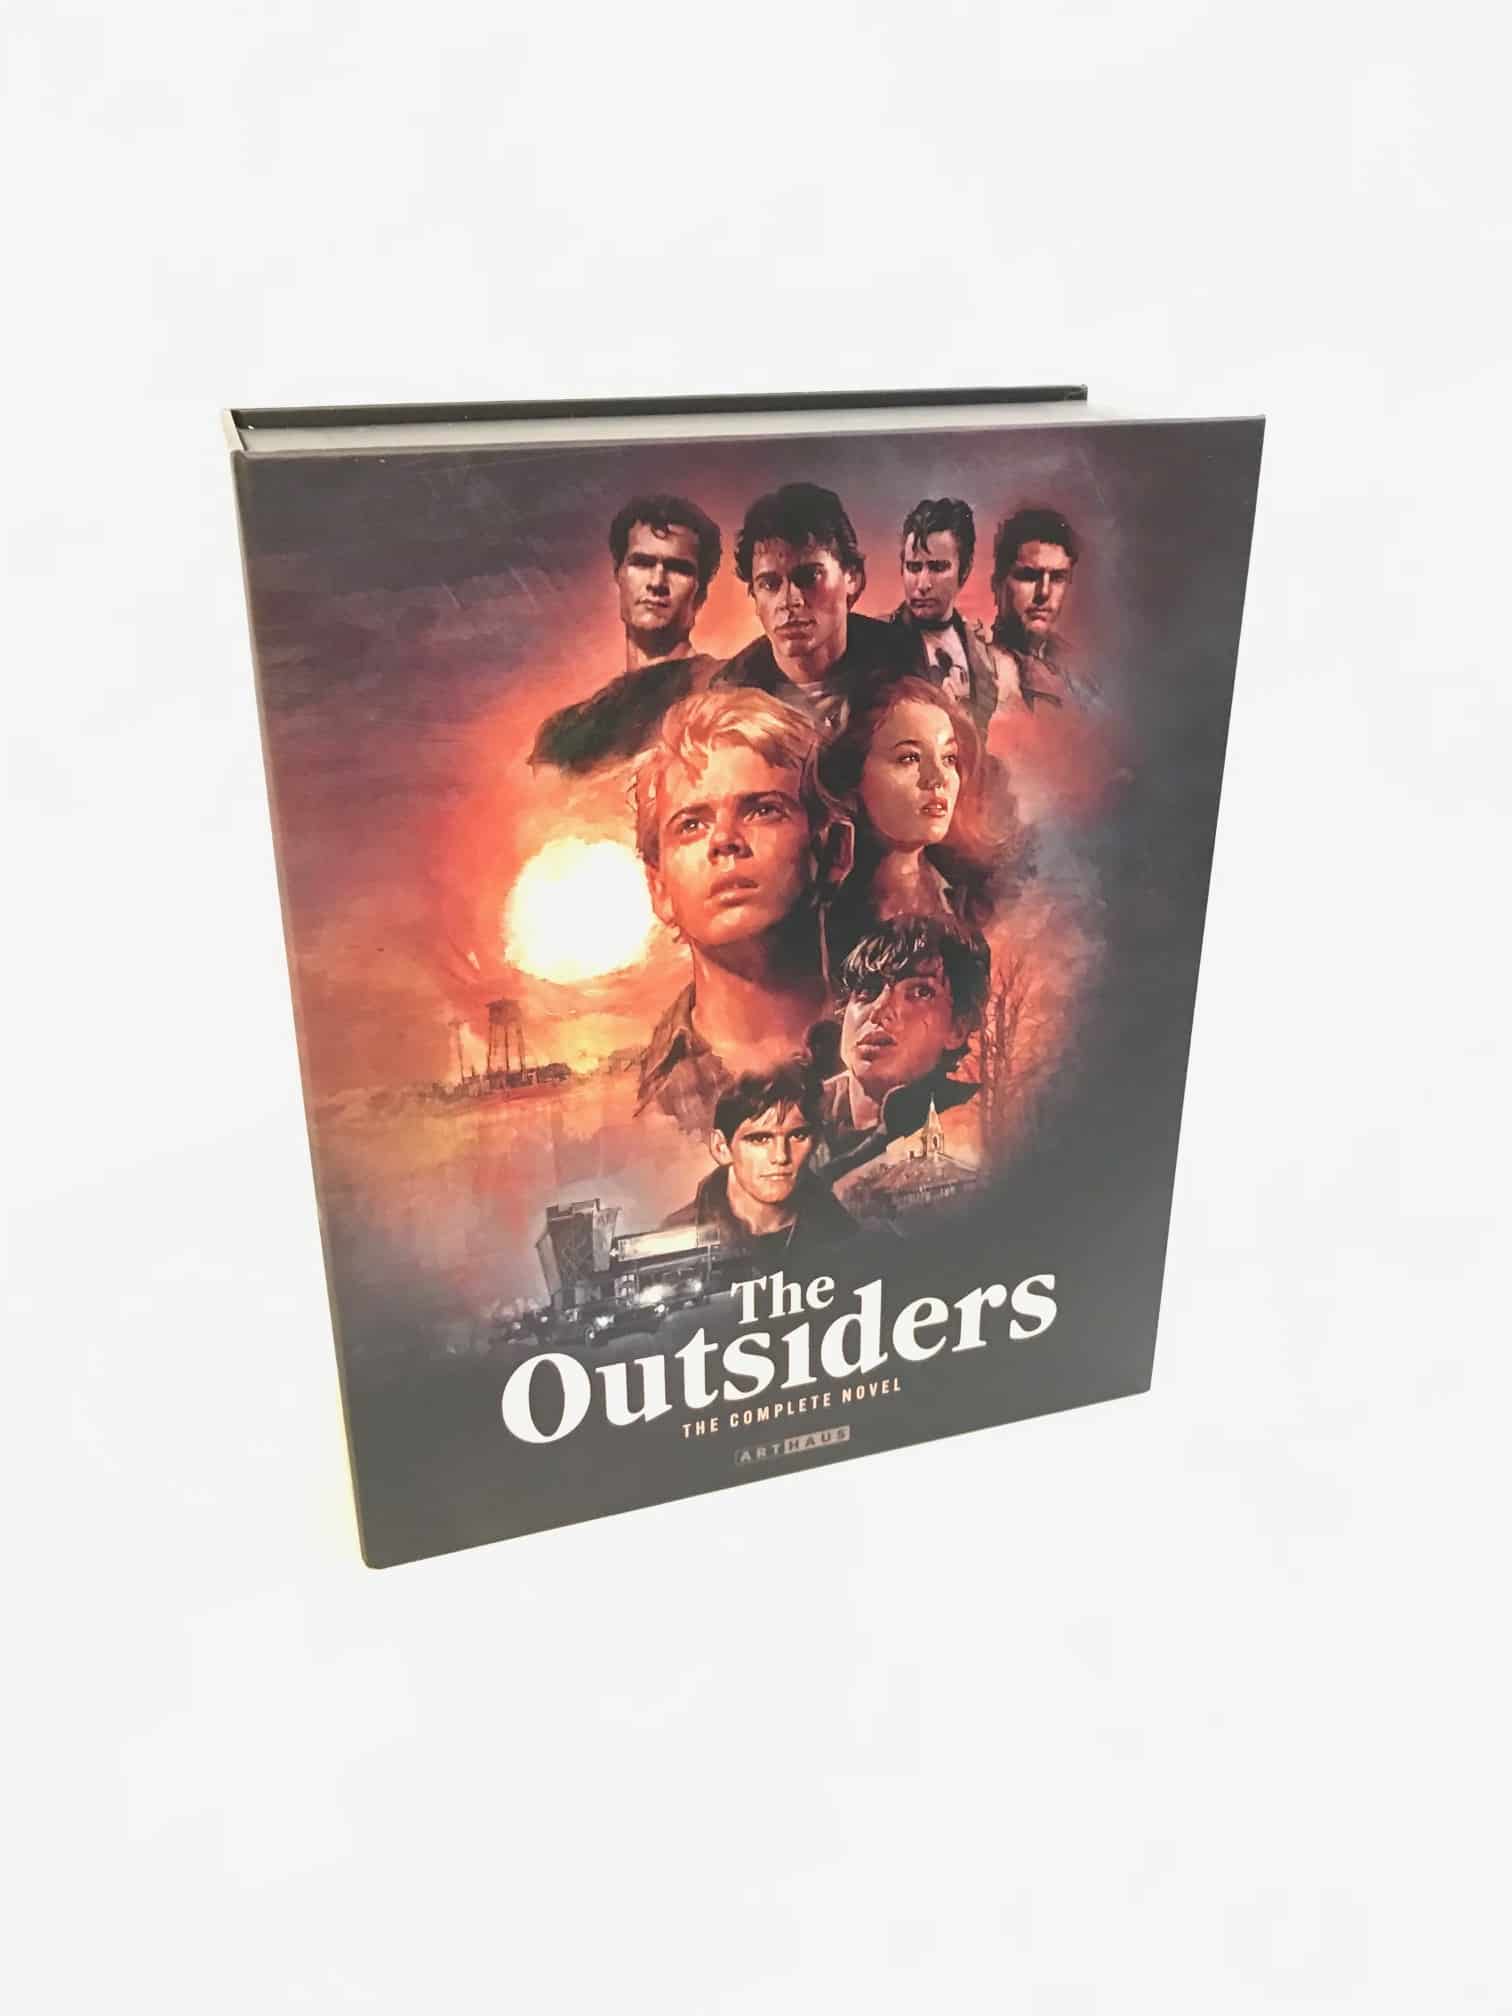 [Review] The Outsiders (1983) in der Limited Collector’s Edition UHD (inkl. Blu-ray)